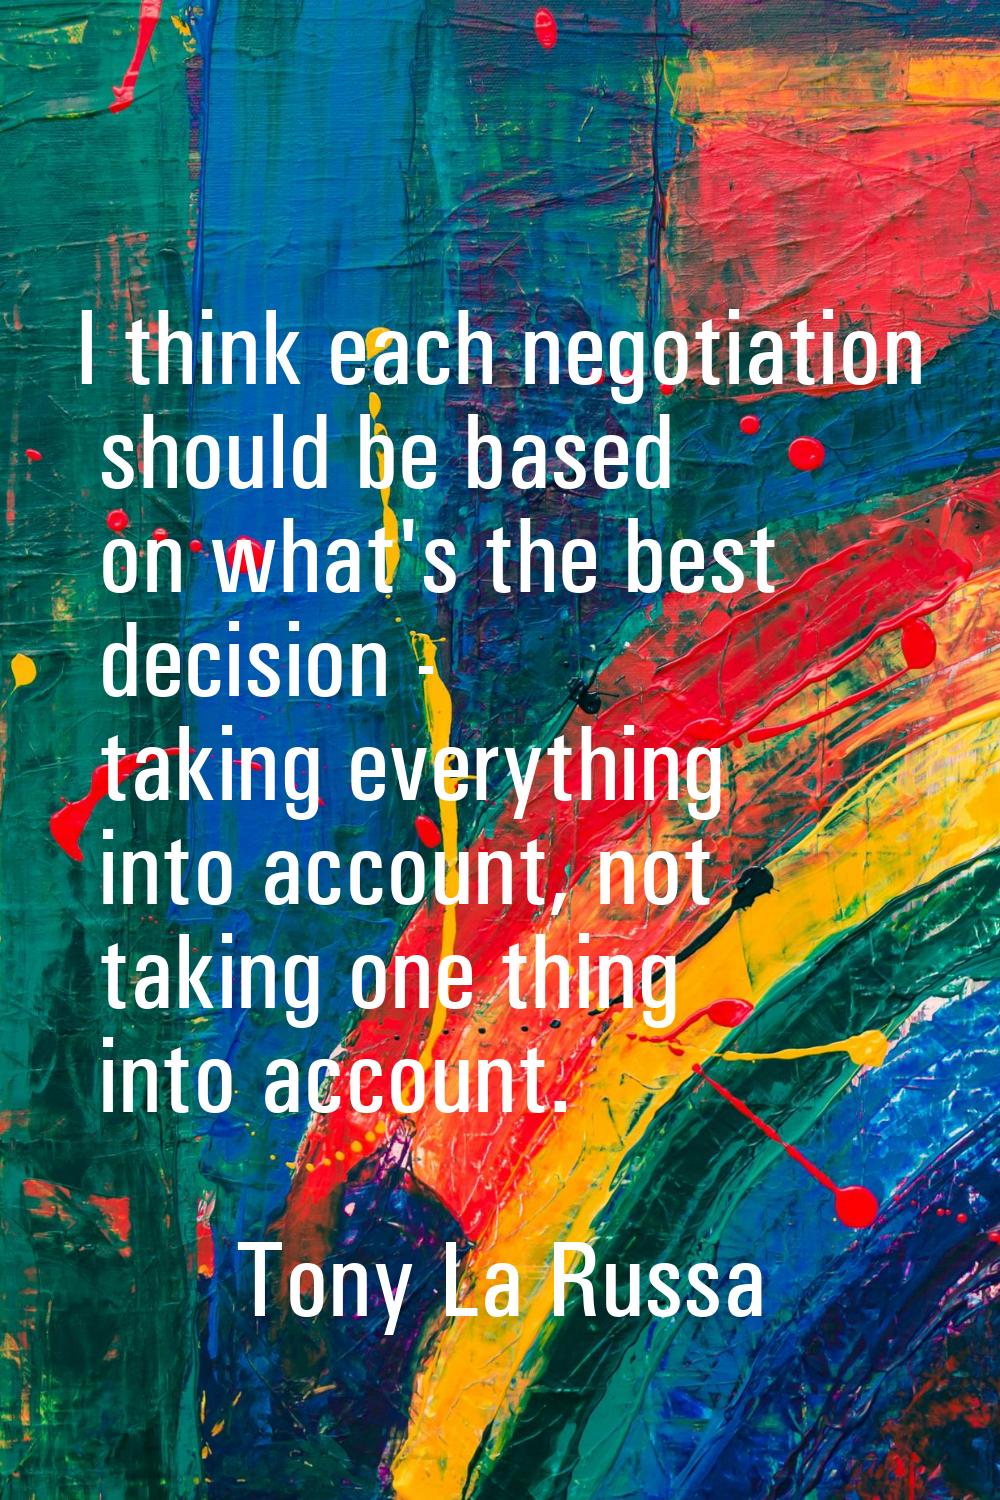 I think each negotiation should be based on what's the best decision - taking everything into accou